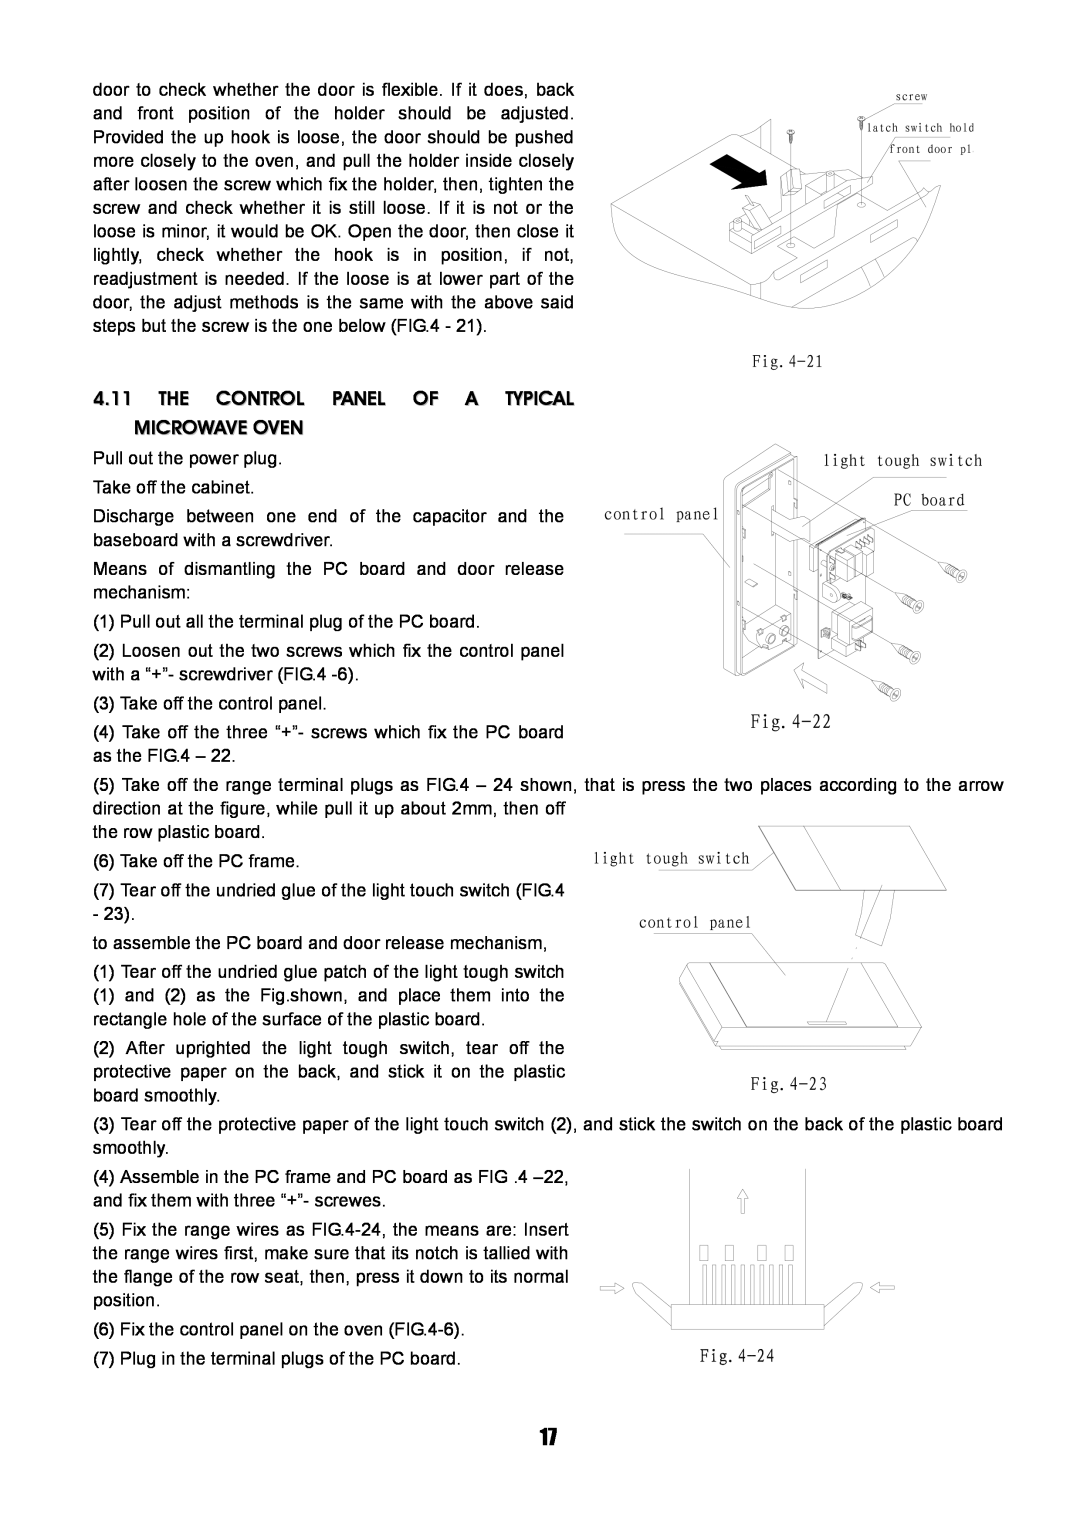 Sanyo SM-GA0005 service manual 4.11THE CONTROL PANEL OF A TYPICAL MICROWAVE OVEN 